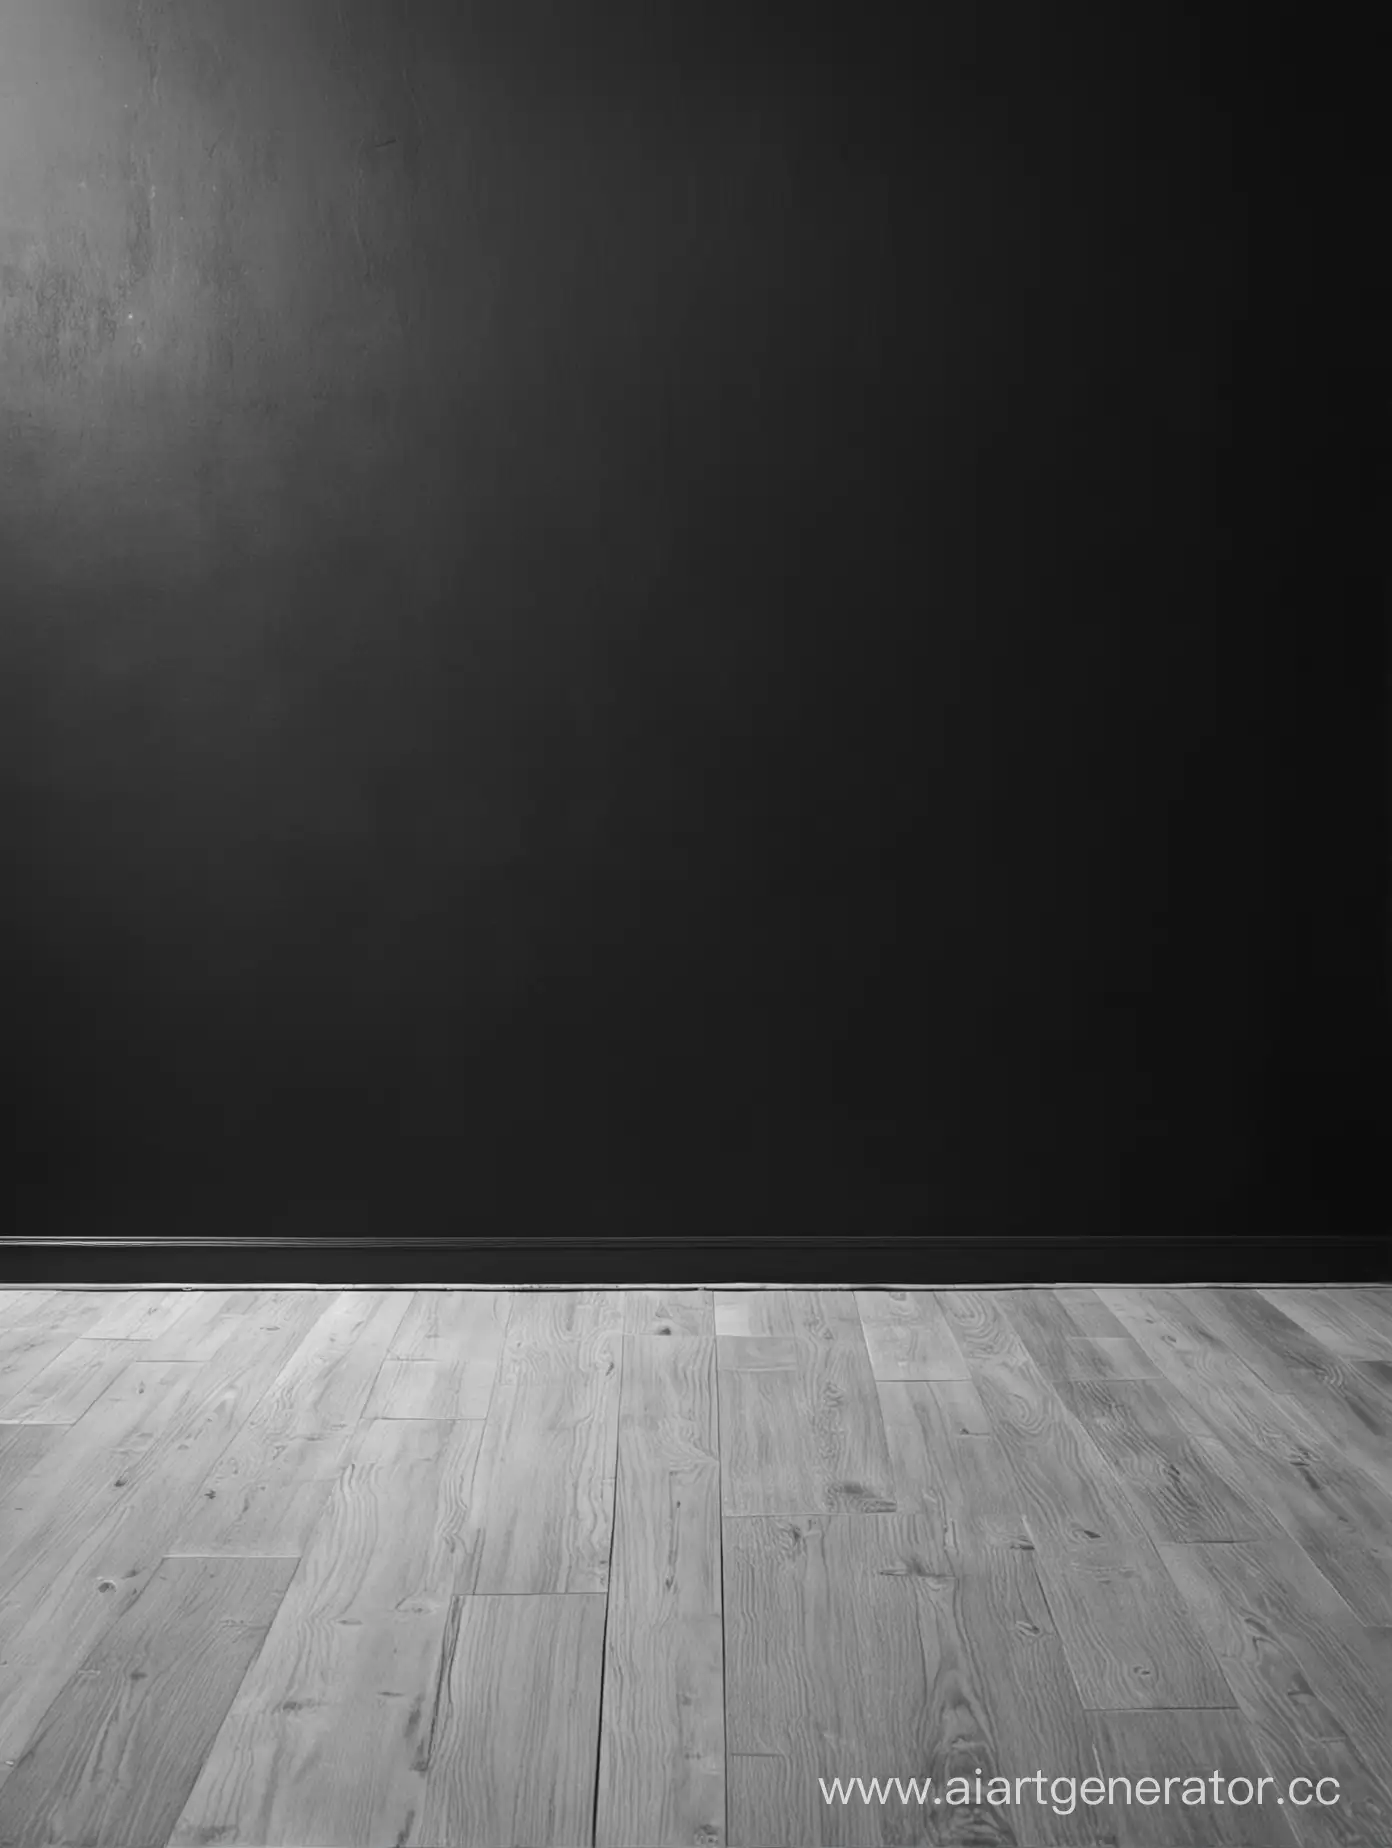 Contrastive-Black-Wall-and-White-Floor-Background